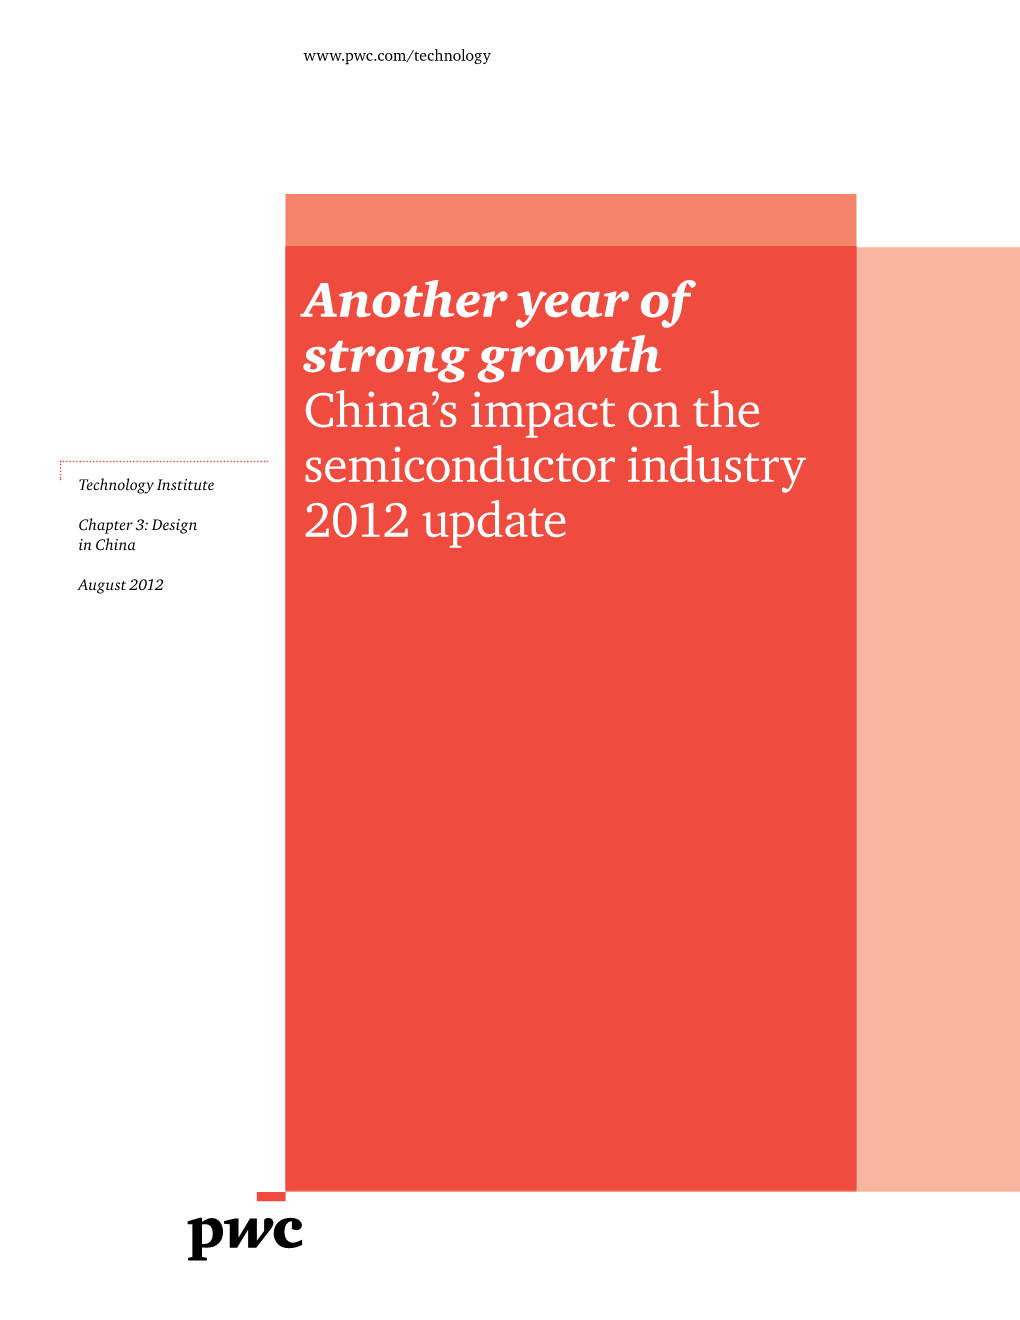 Another Year of Strong Growth China's Impact on the Semiconductor Industry 2012 Update